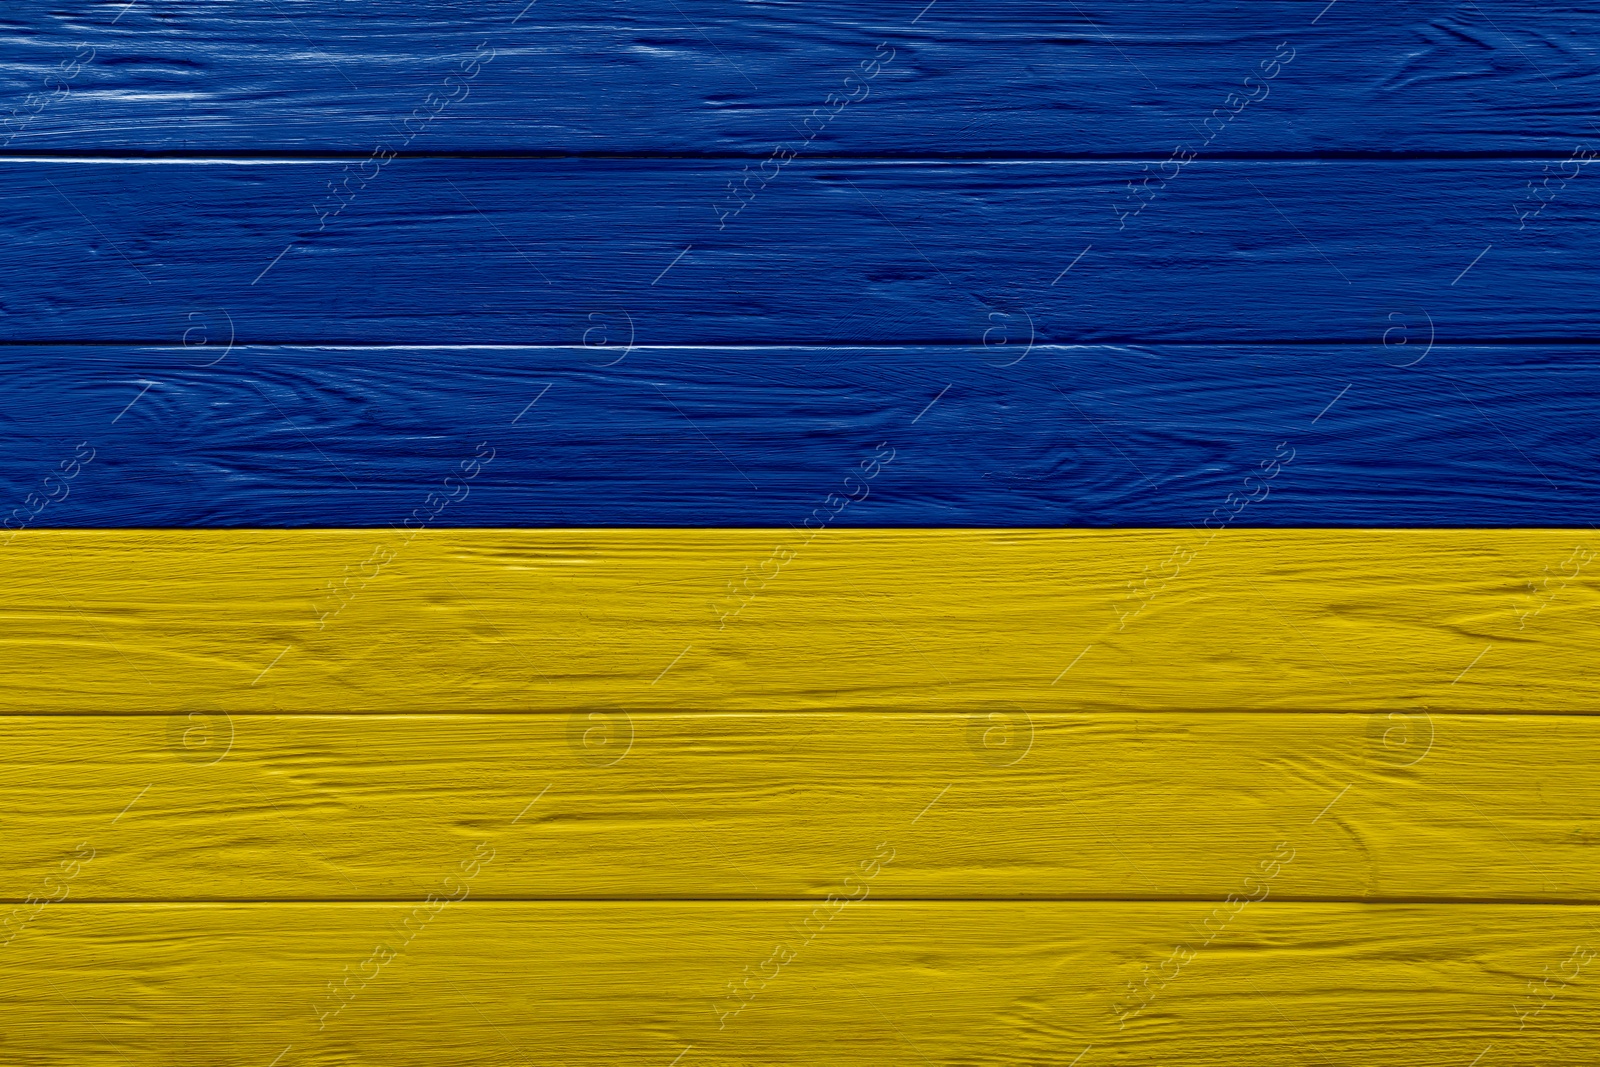 Image of National flag of Ukraine painted on wooden surface